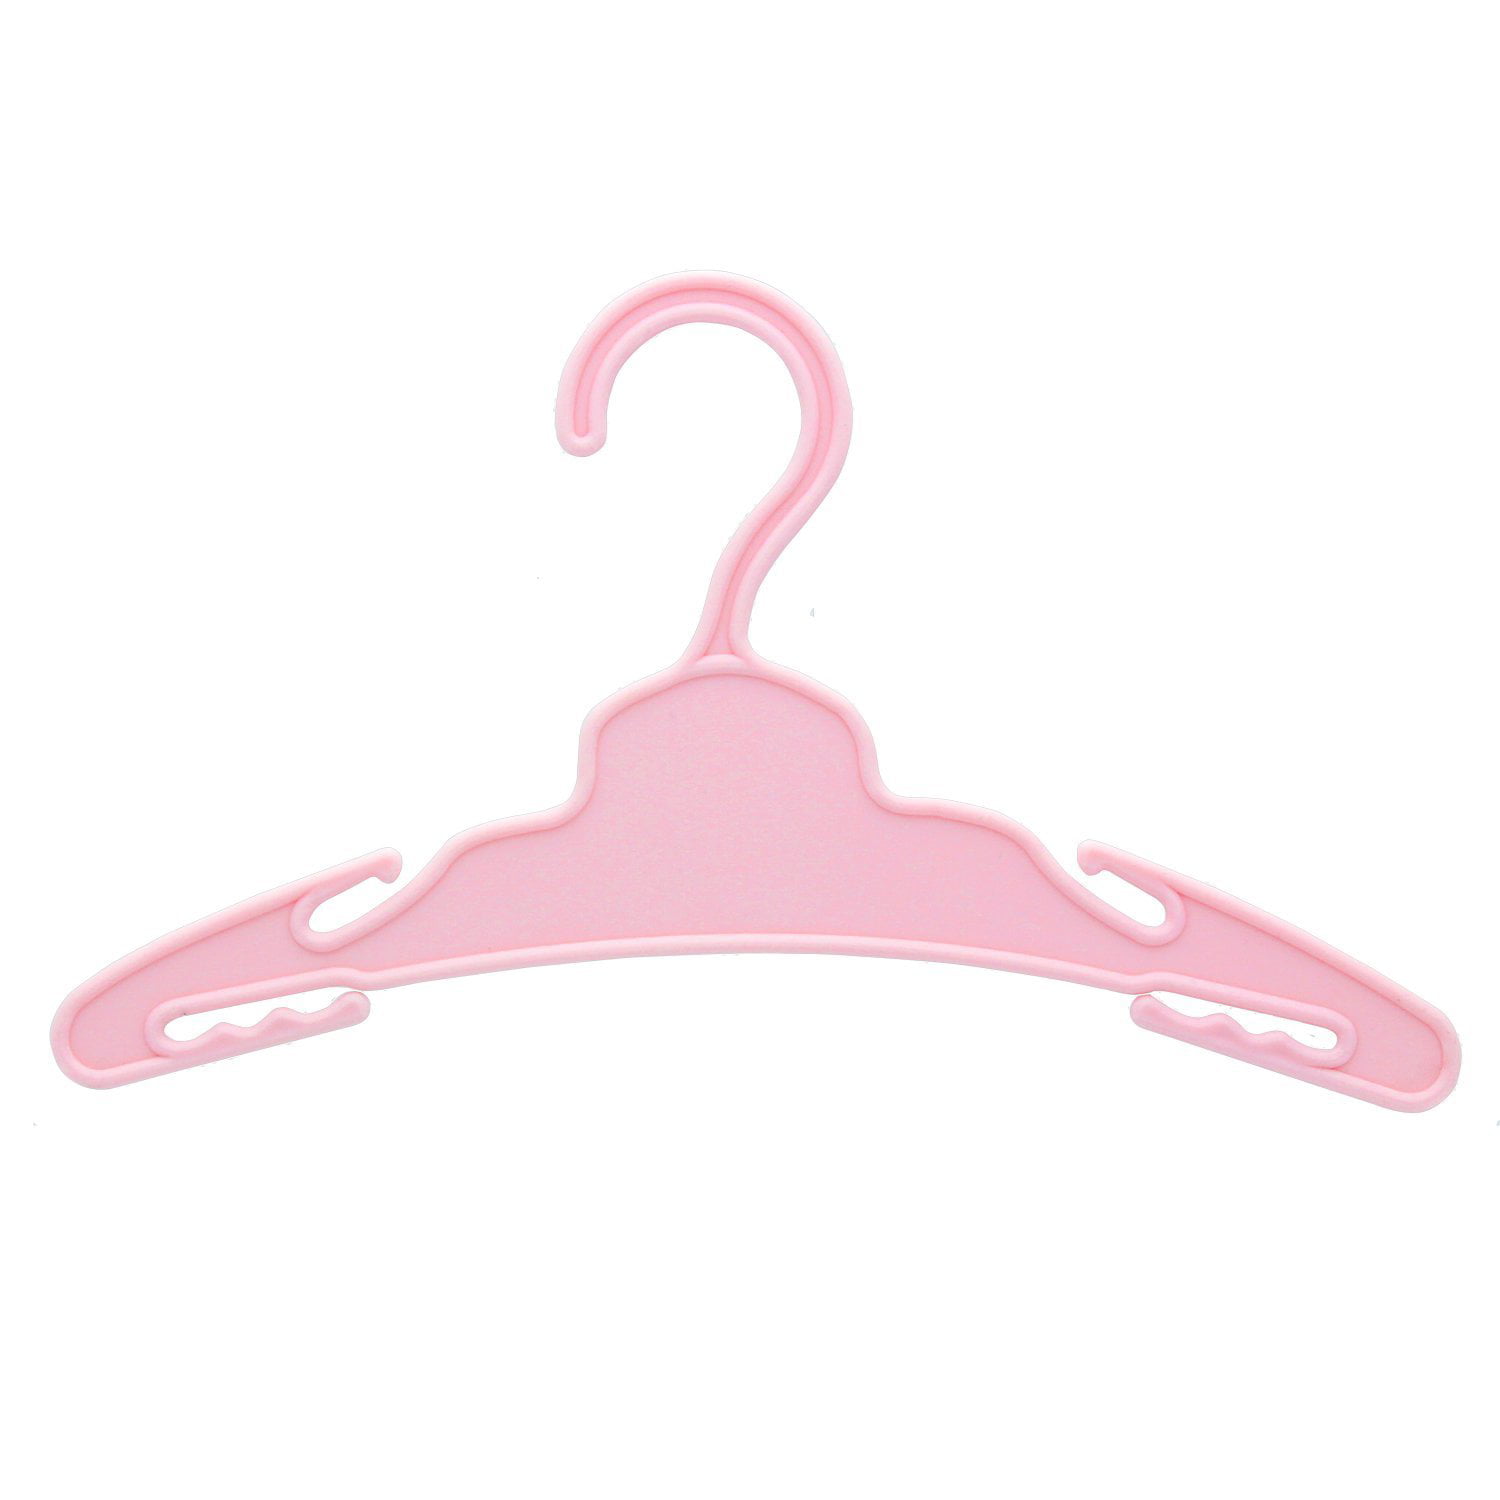 Doll Hangers Set of 12 Plastic Hangers Fits 18 Inch American Girl Dolls Clothes